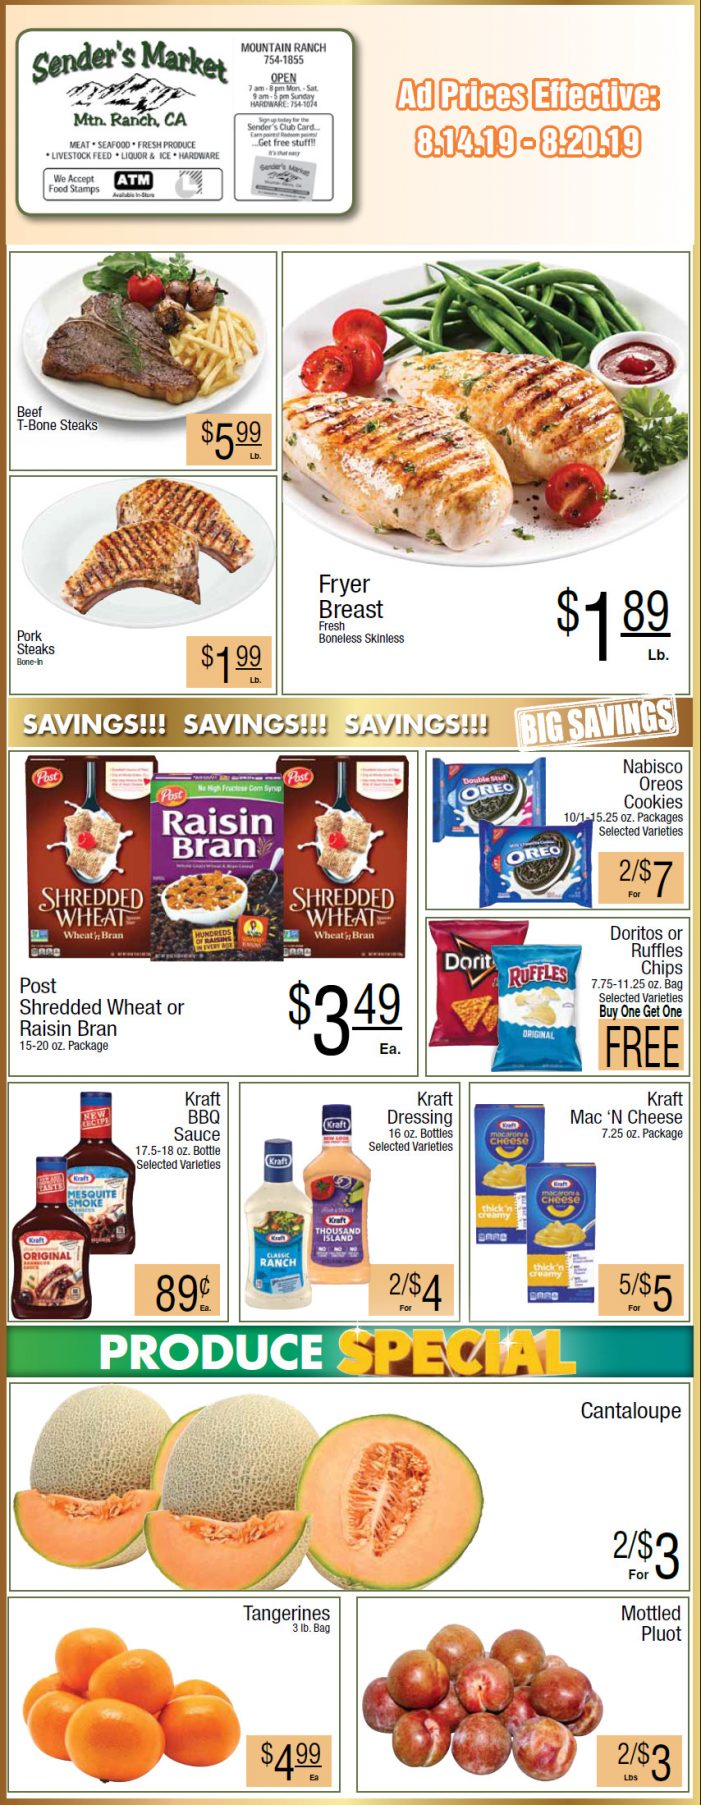 Sender’s Market Weekly Ad & Grocery Specials Through August 20th